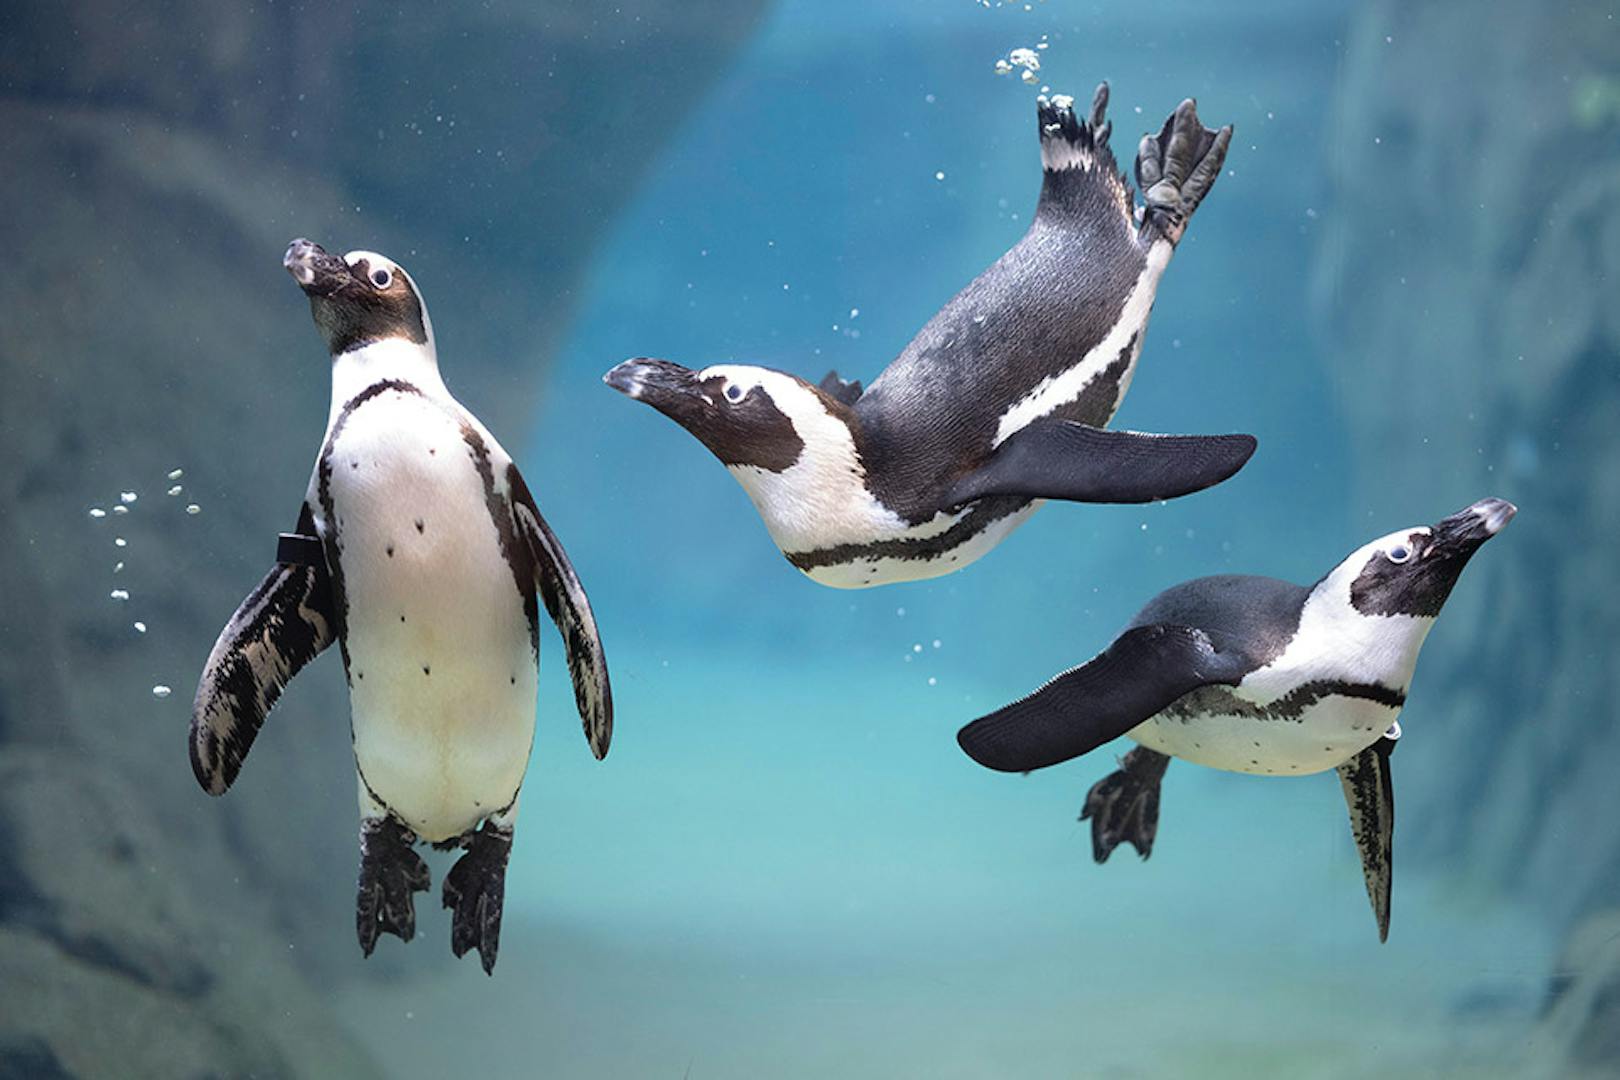 Three African penguins swimming at the National Aviary in Pittsburgh, Pennsylvania (photo by Mike Faix)